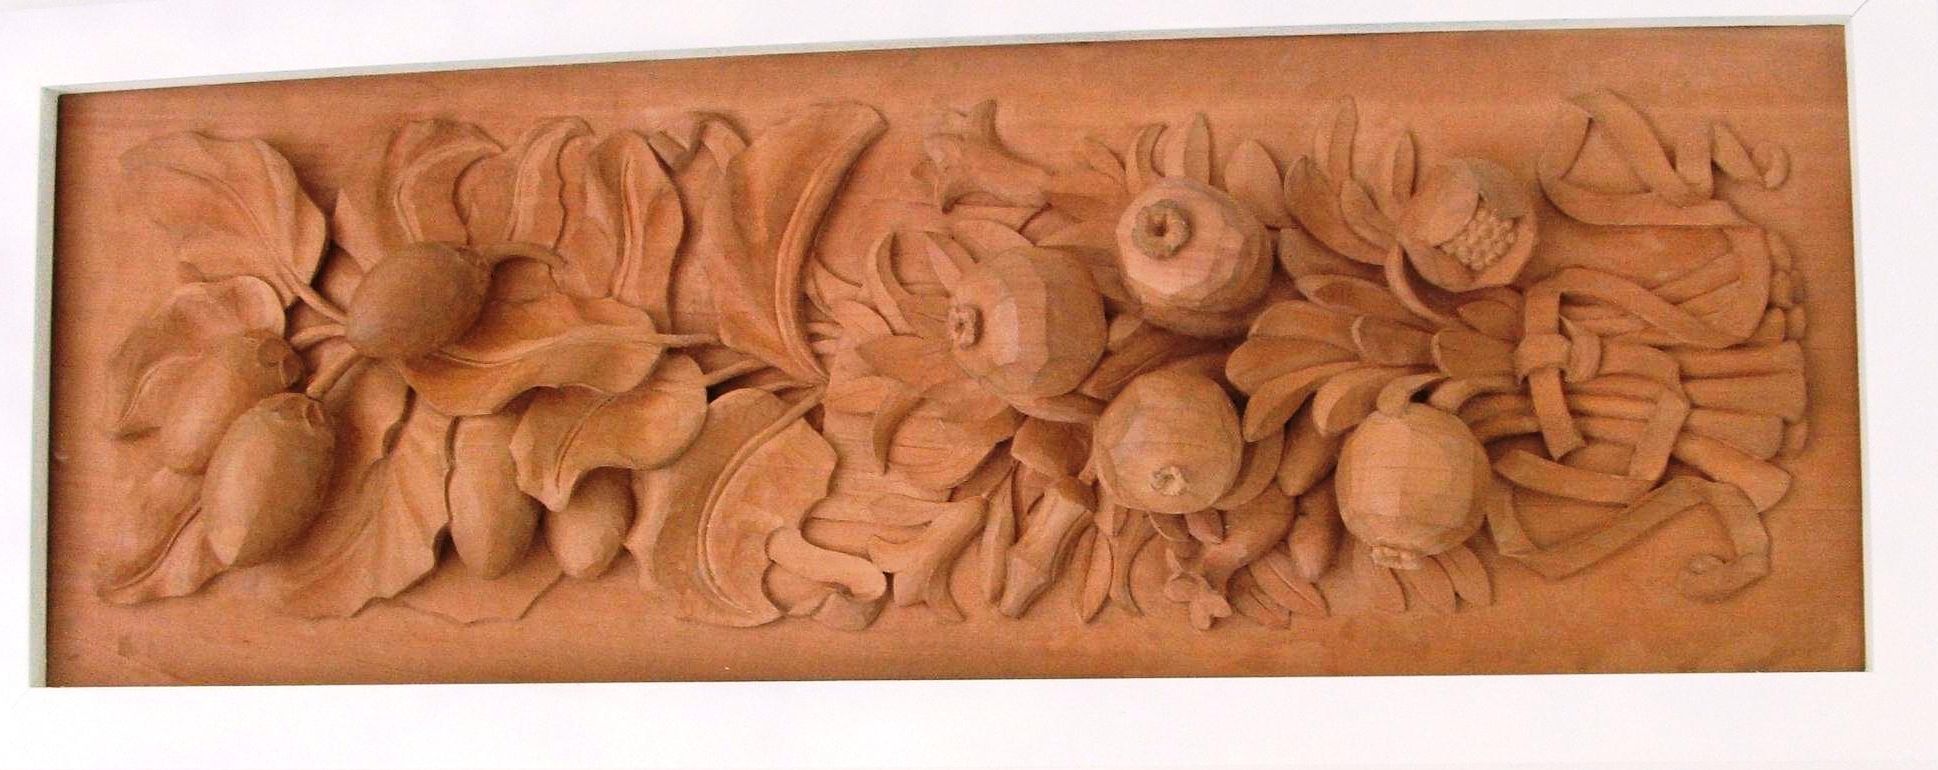 Wood Carving Artists Famous